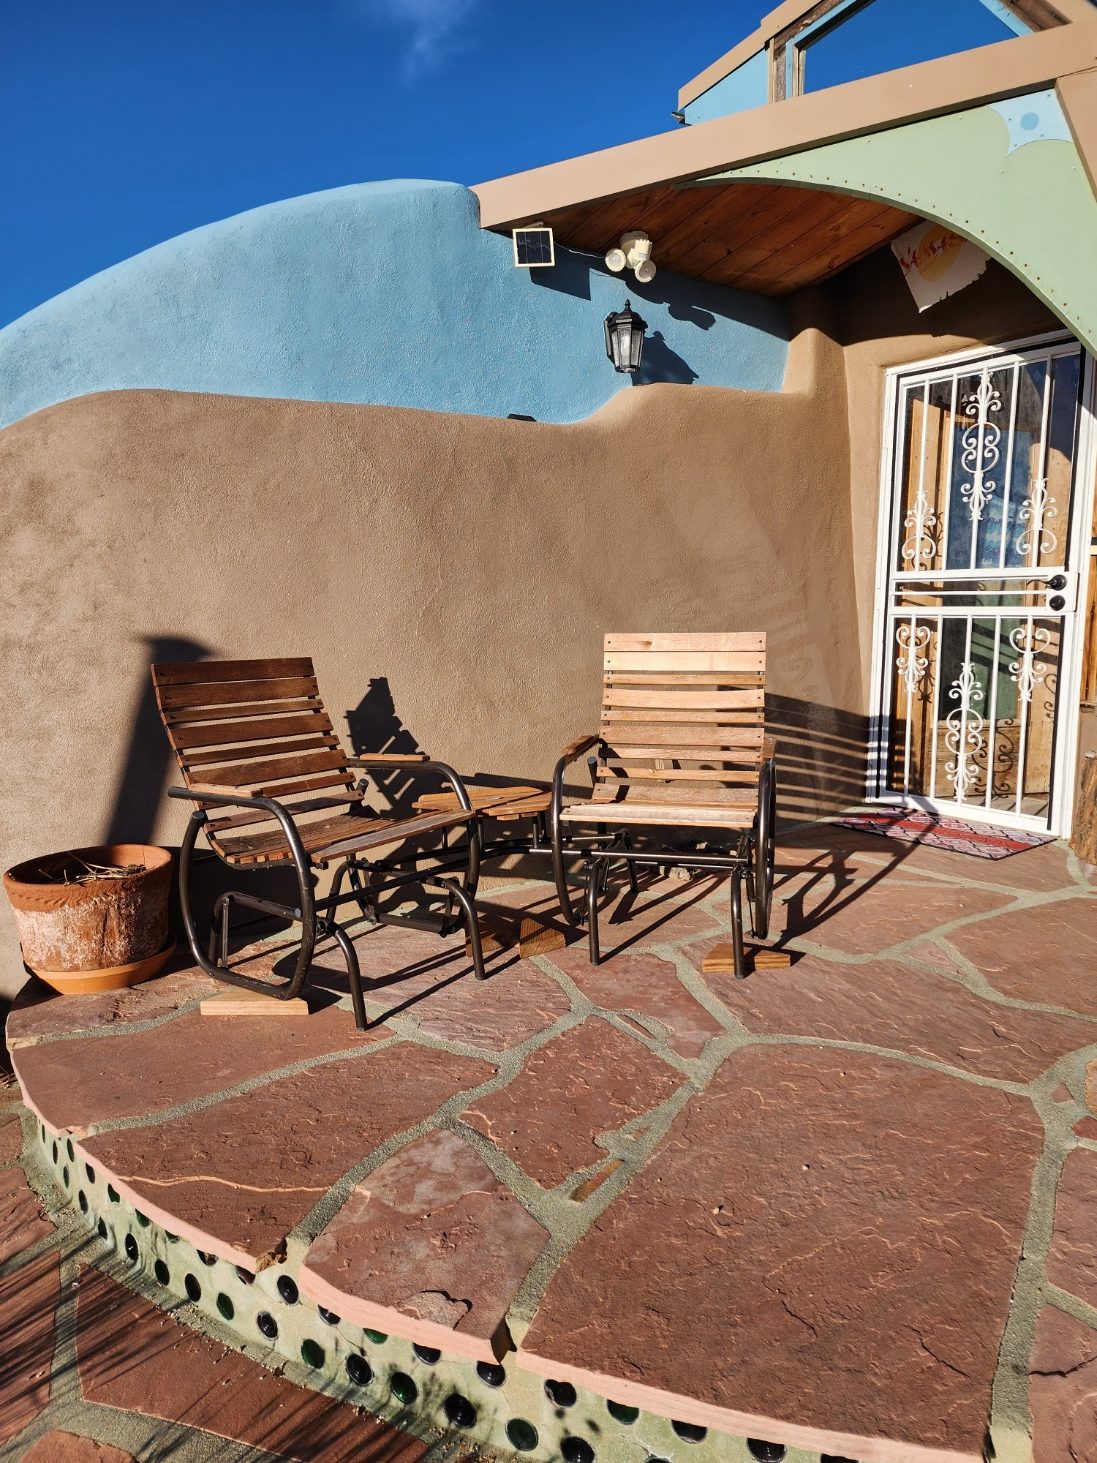 Two chairs on the front patio of the Peaceful Earthship Oasis